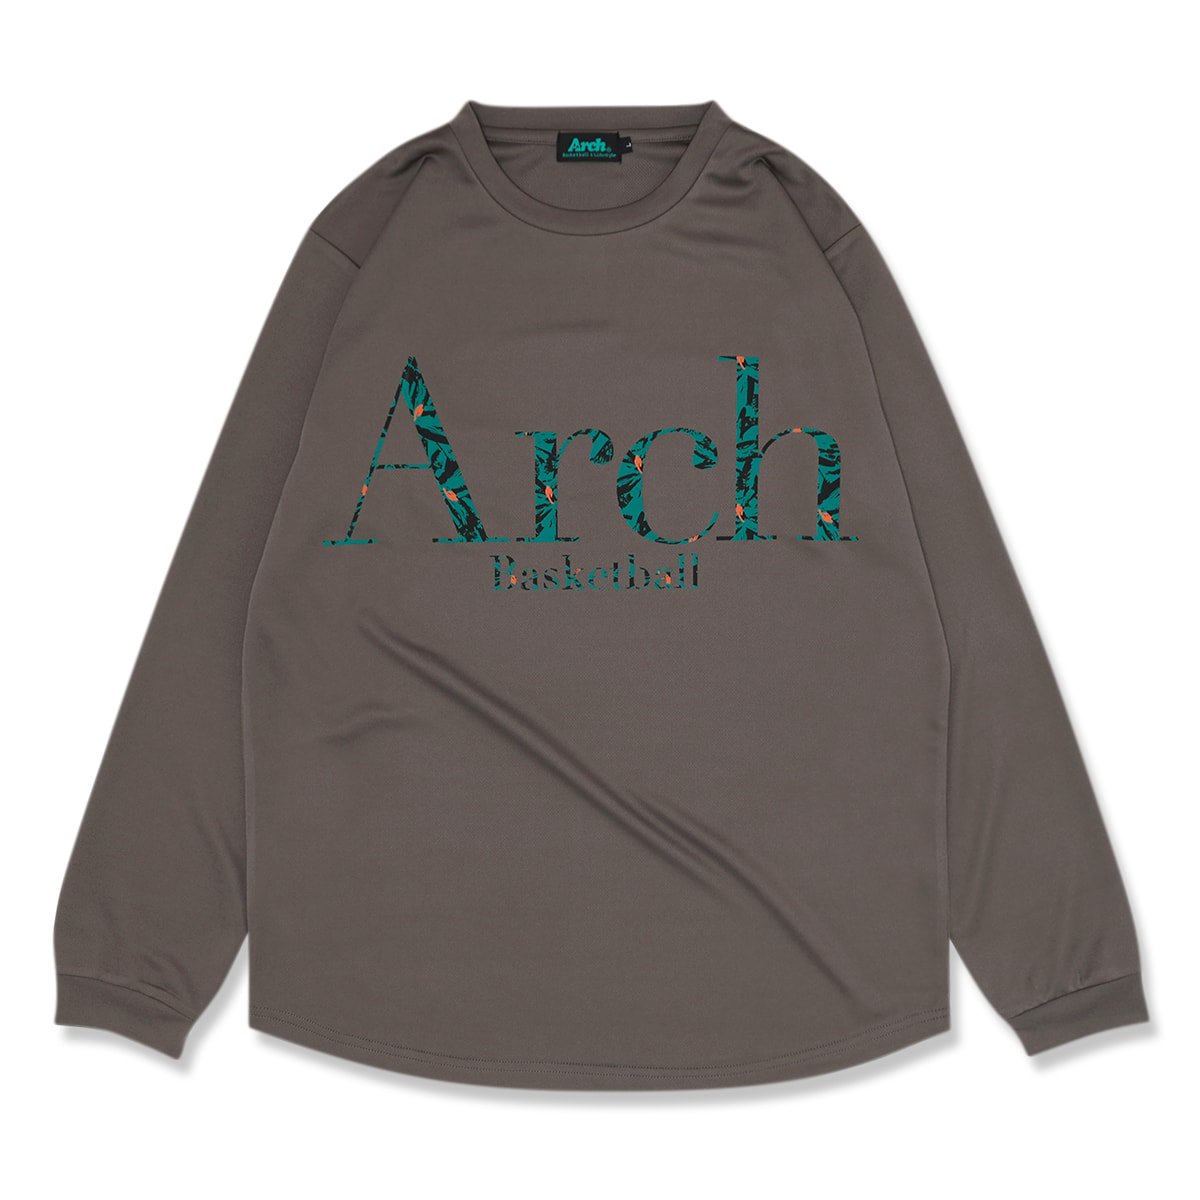 brushed bloom L/S tee [DRY]【charcoal】 - Arch ☆ アーチ 